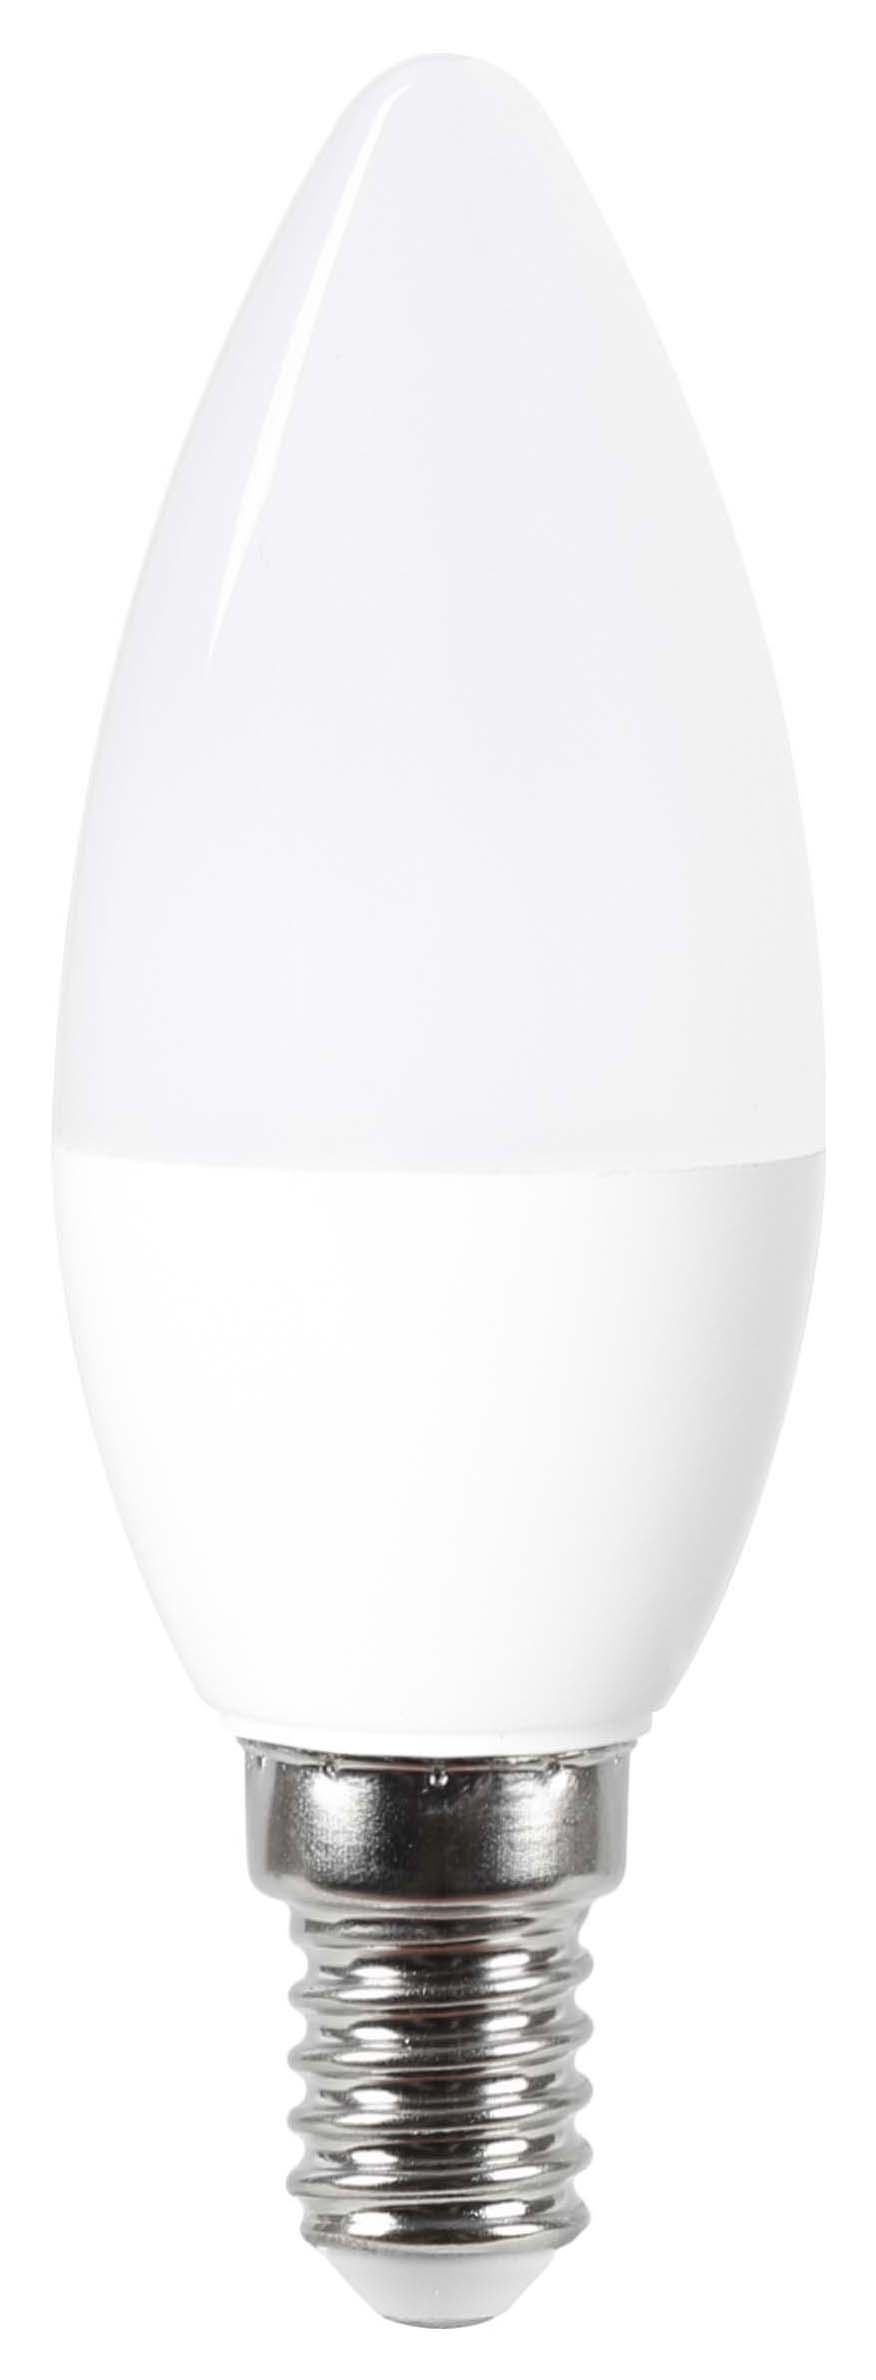 Wickes Dimmable Opal LED E14 Candle 4.9W Warm White Light Bulb